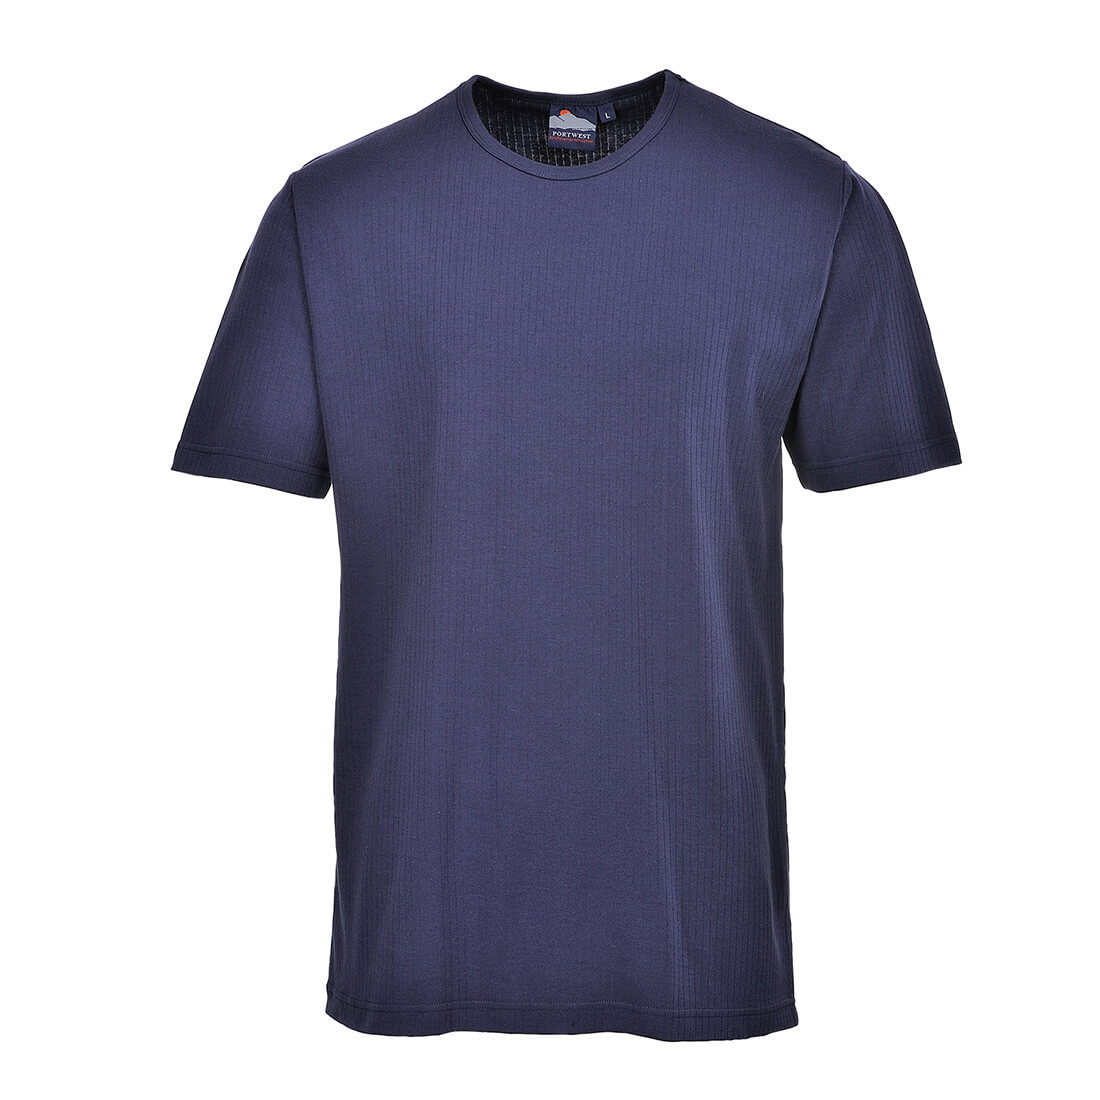 Image of Portwest Thermal Short Sleeve T Shirt Navy L